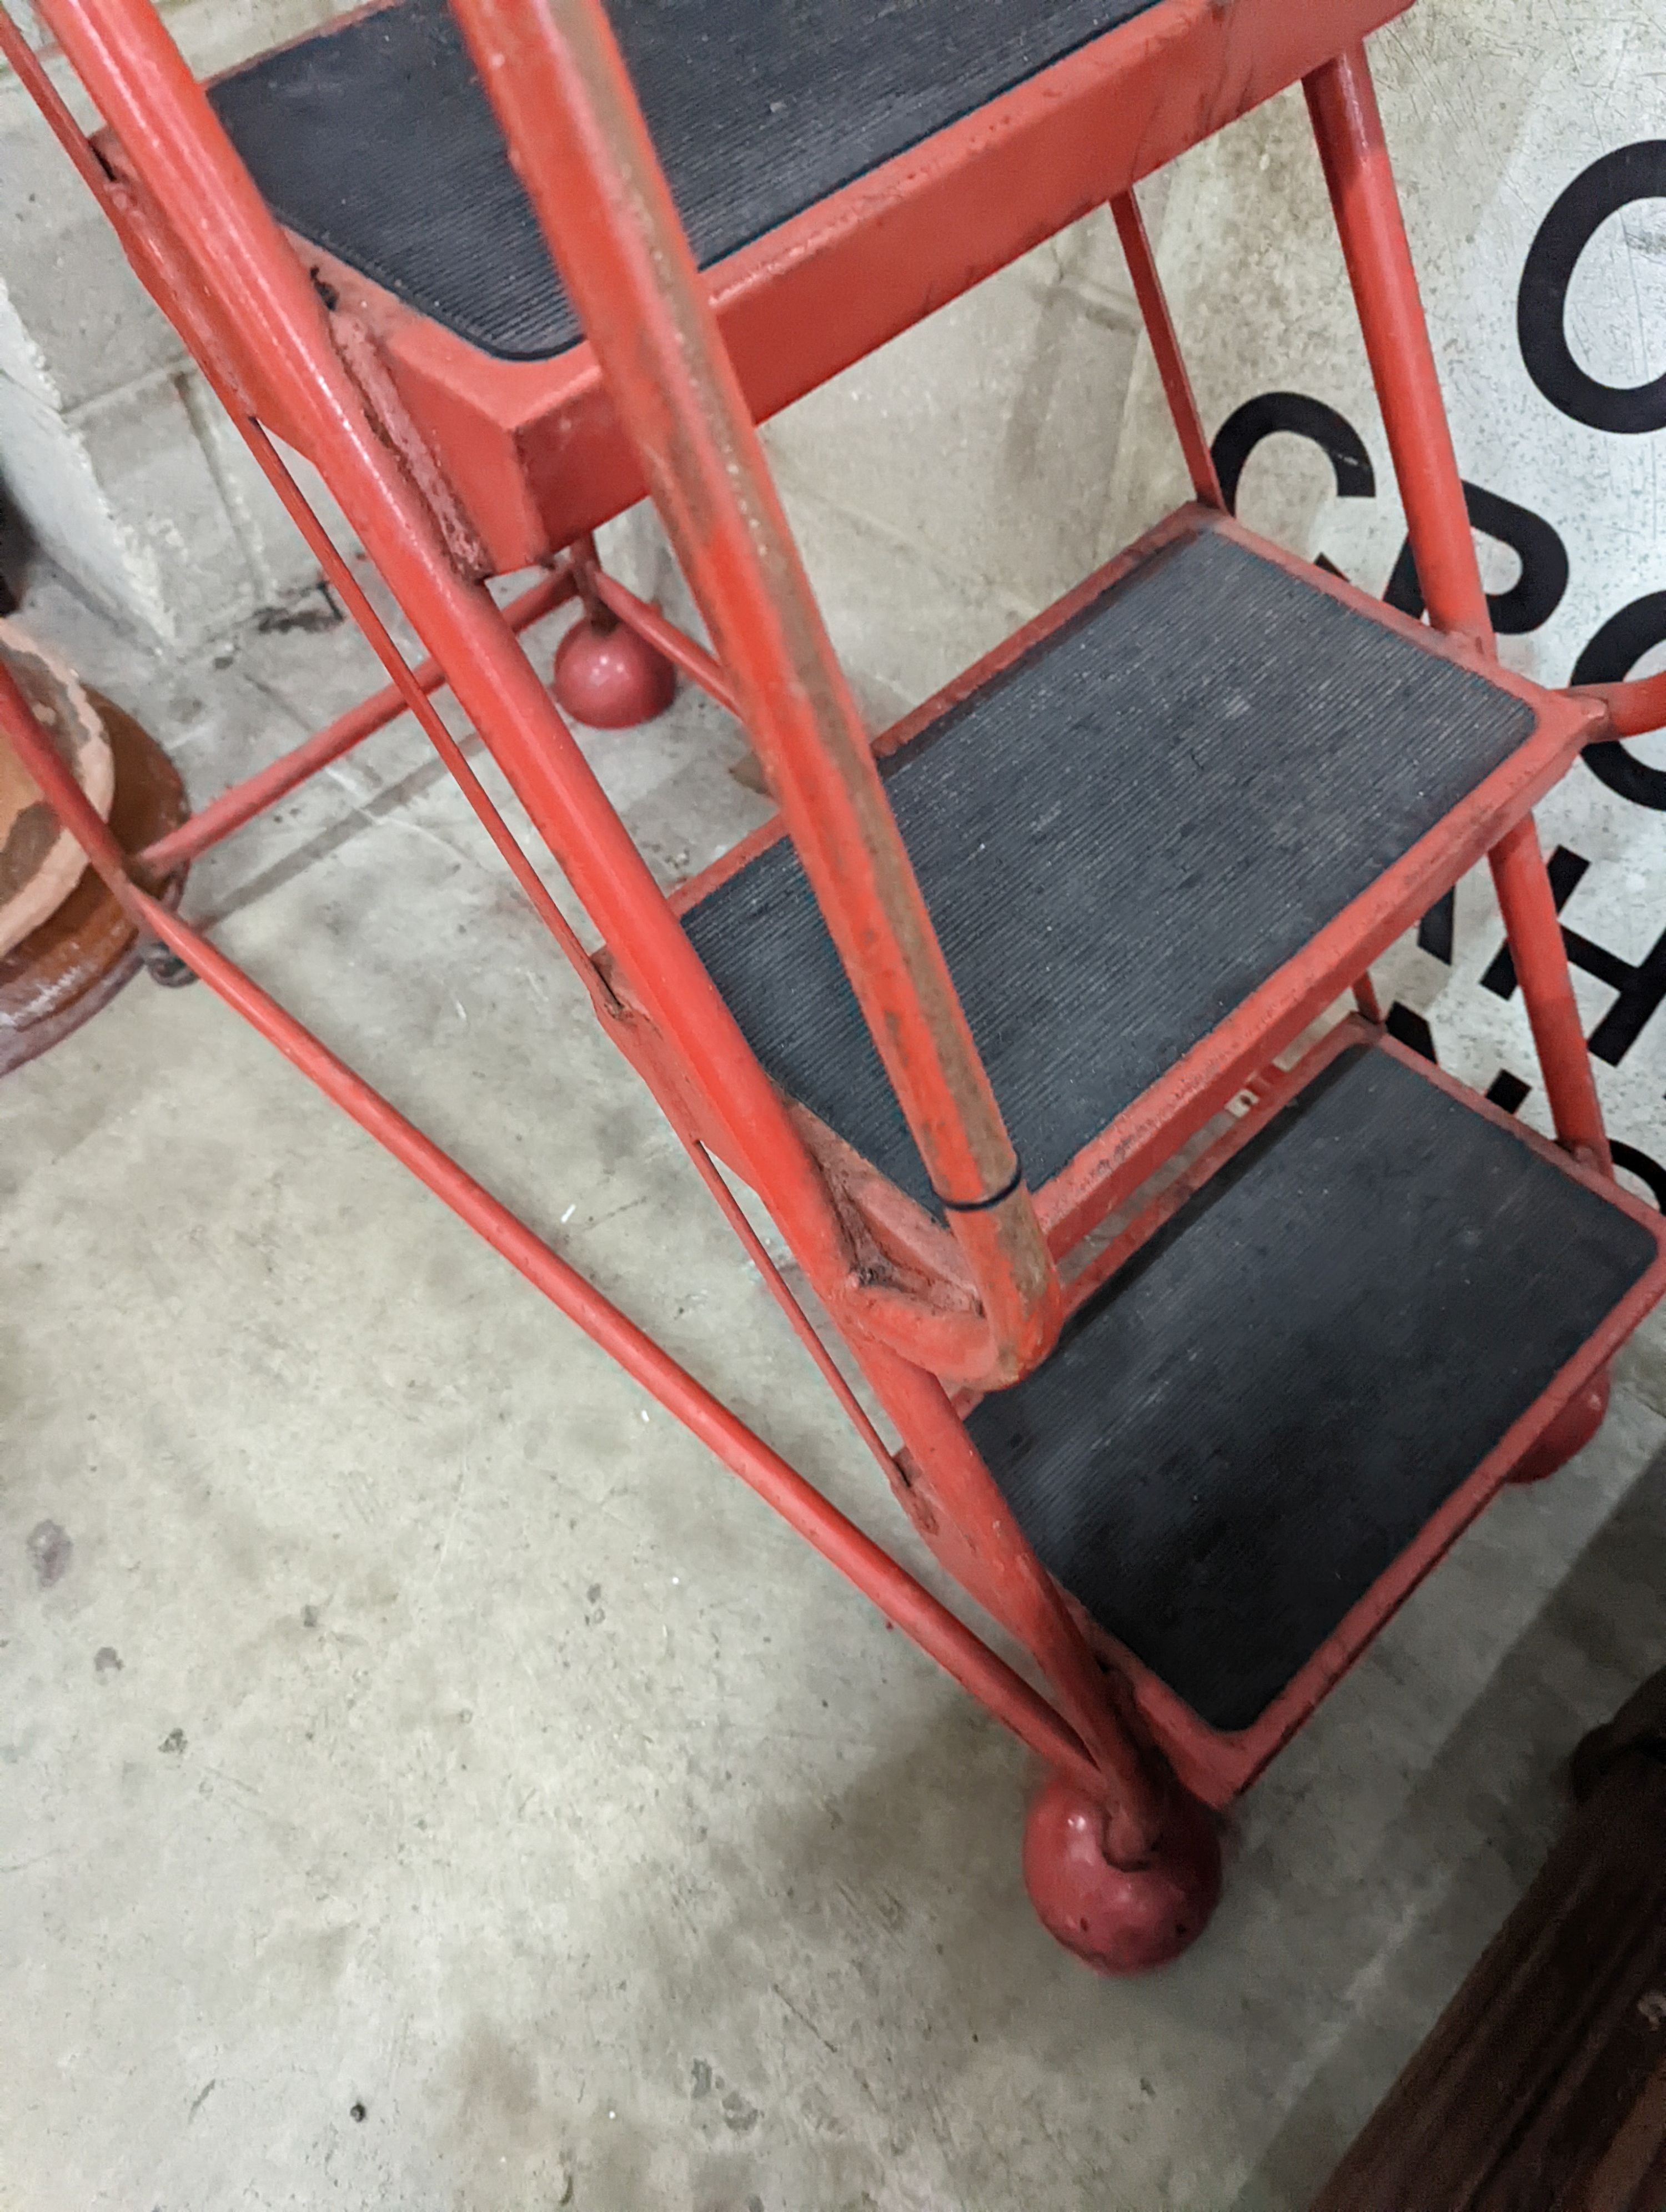 A set of red painted metal steps, height 188cm